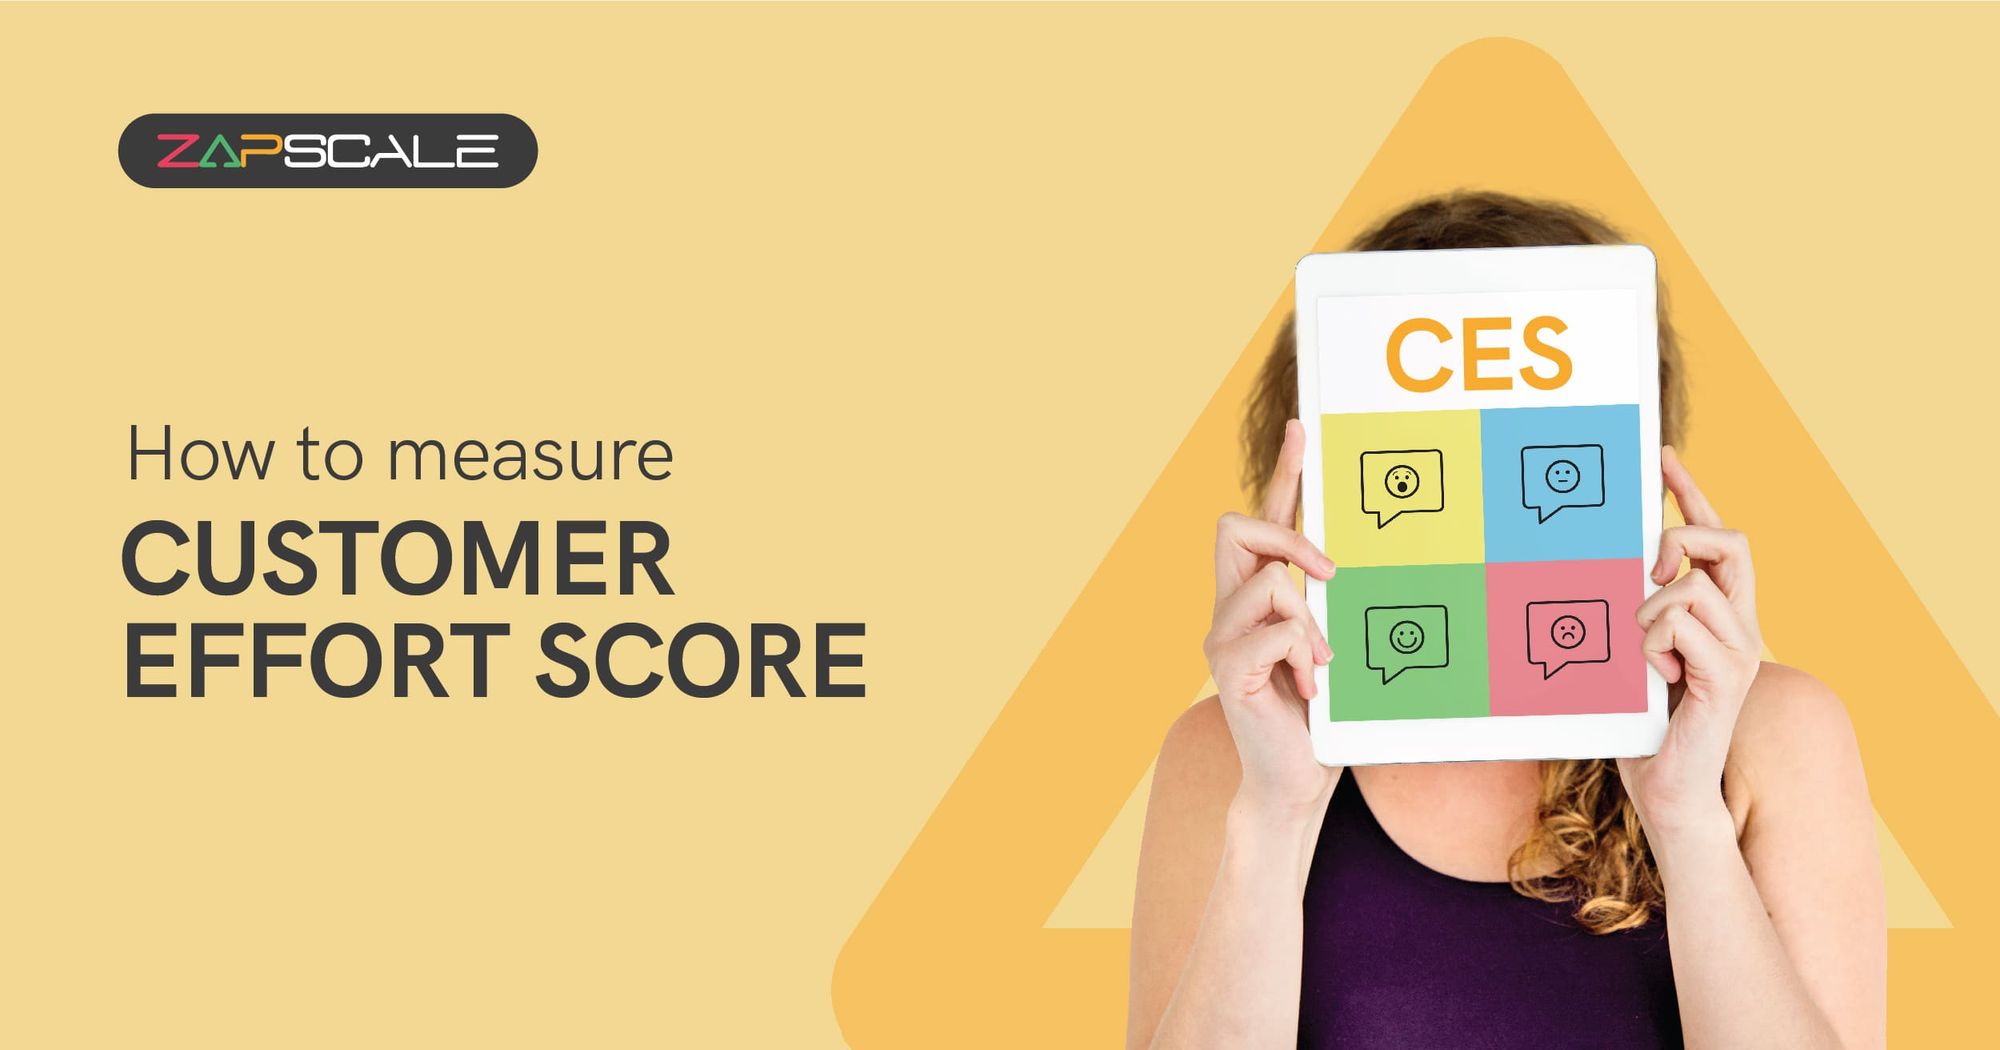 What is Customer Effort Score? How does it compare with CSAT and NPS?